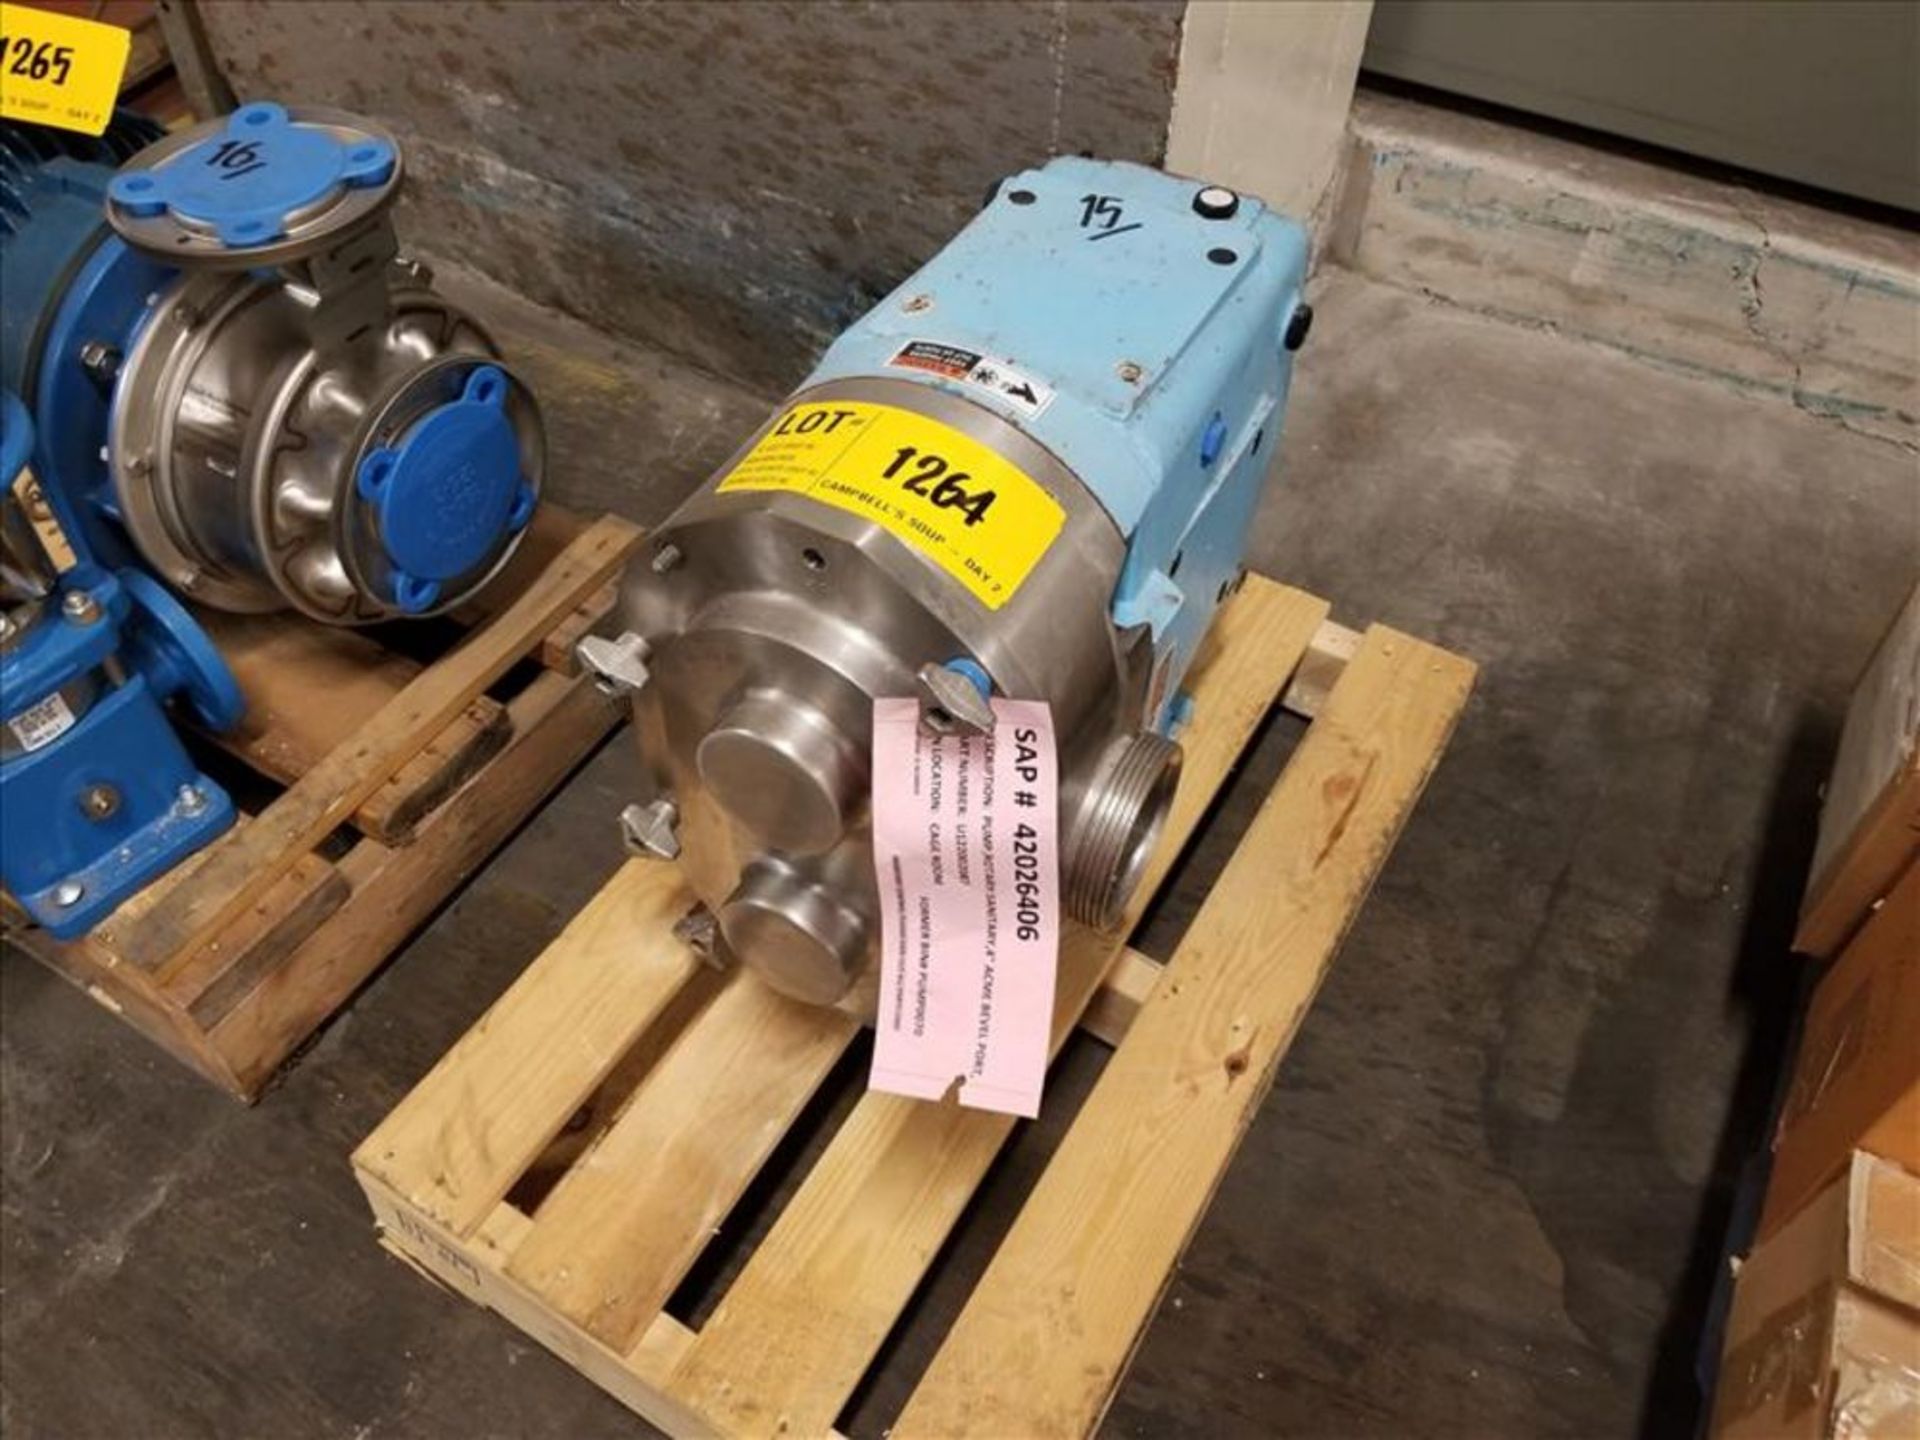 Waukesha mod. No. 220 UI ser. no. 1000002717957 4 in. stainless positive displacement pump